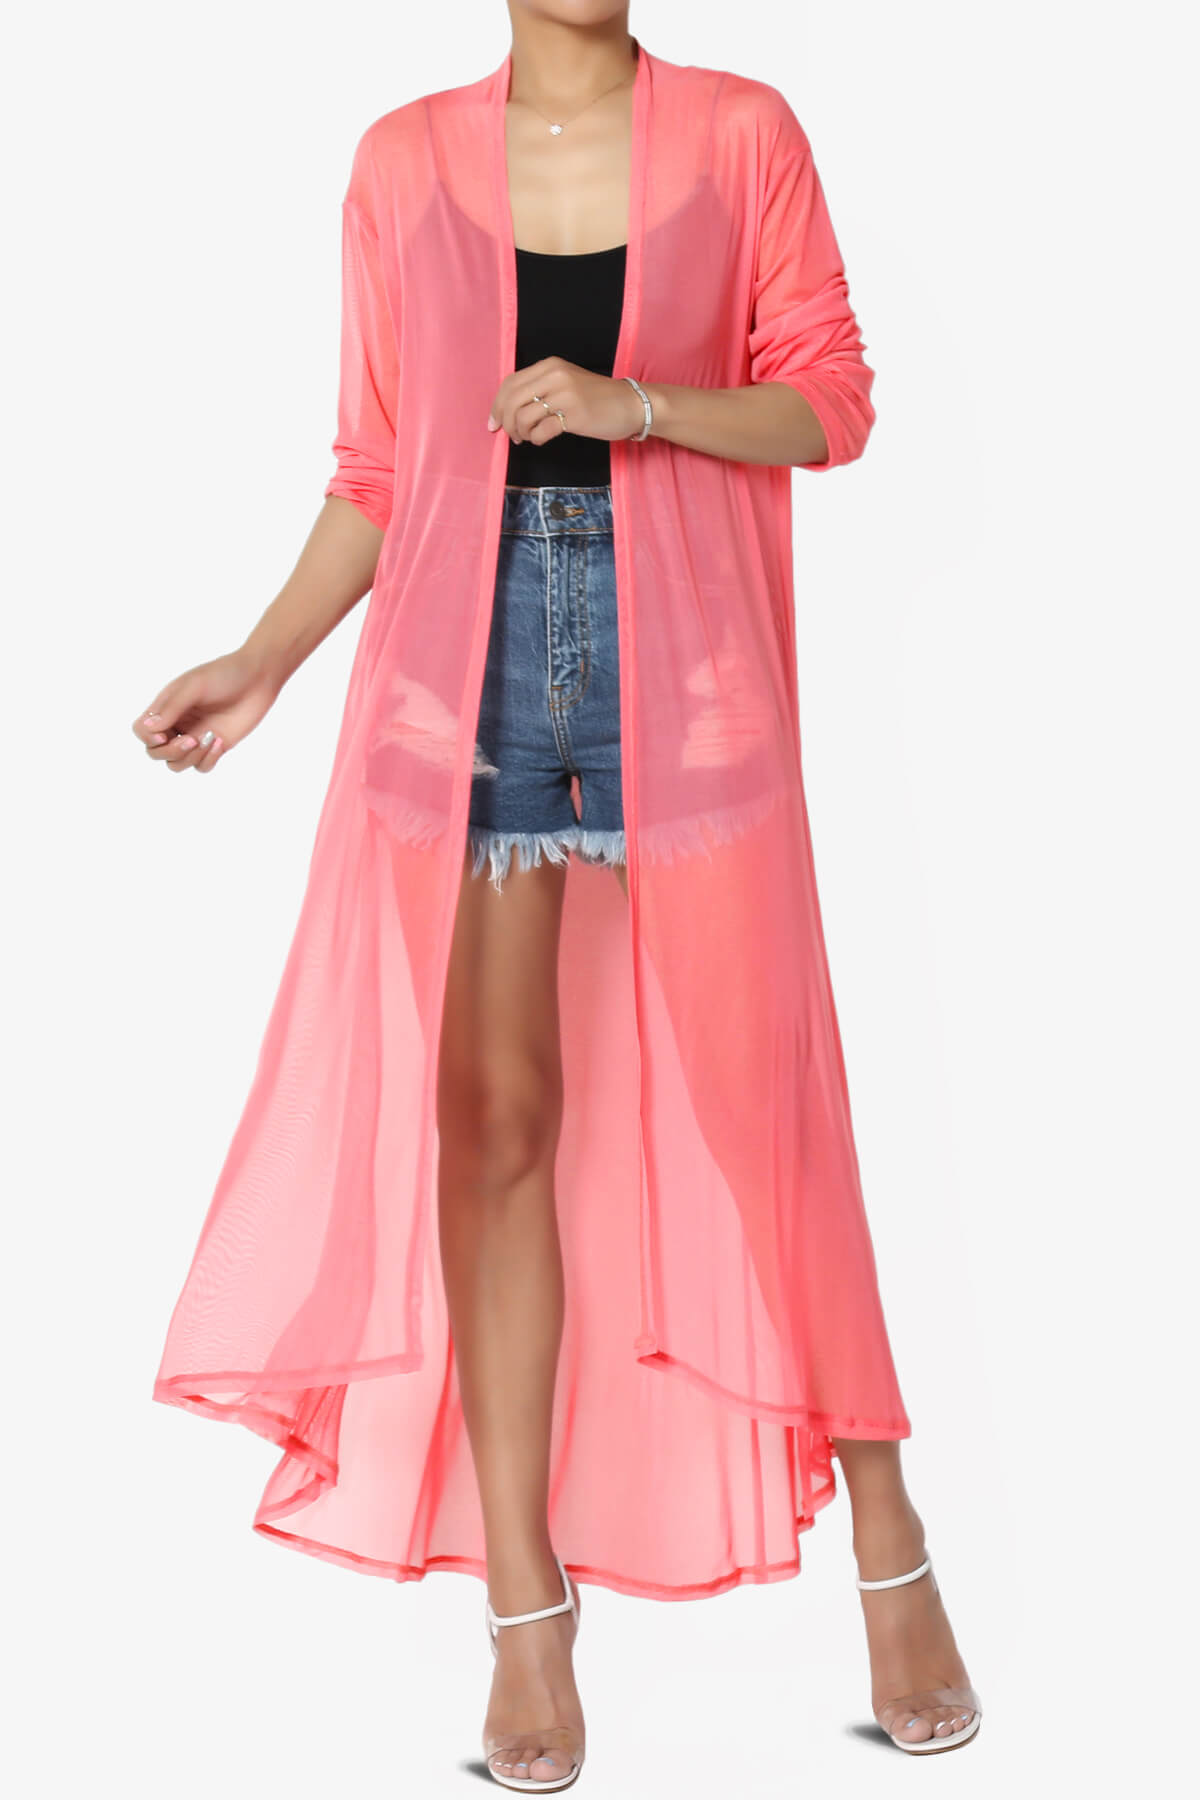 Moxxi Sheer Mesh Open Cardigan Duster NEON CORAL PINK_1